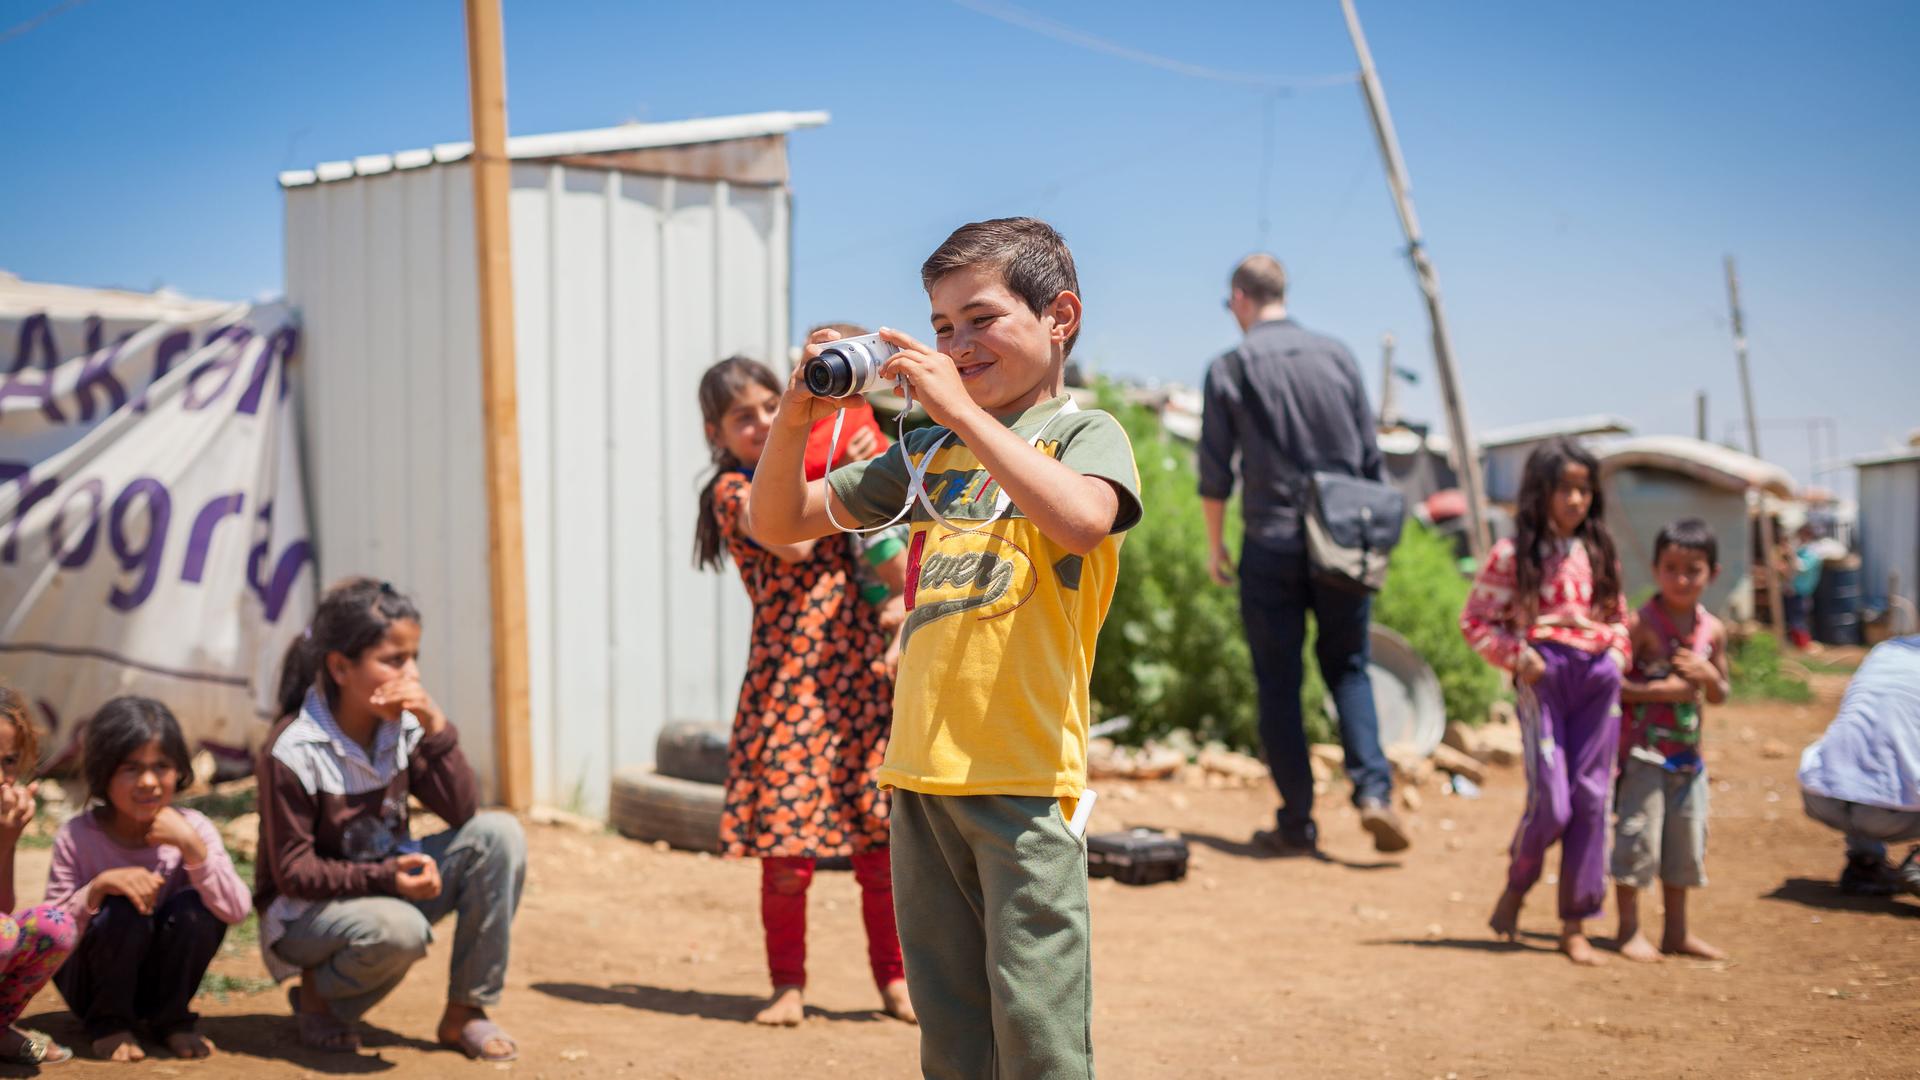 Maher, a Syrian boy, takes photographs of his friends in a refugee camp in Lebanon